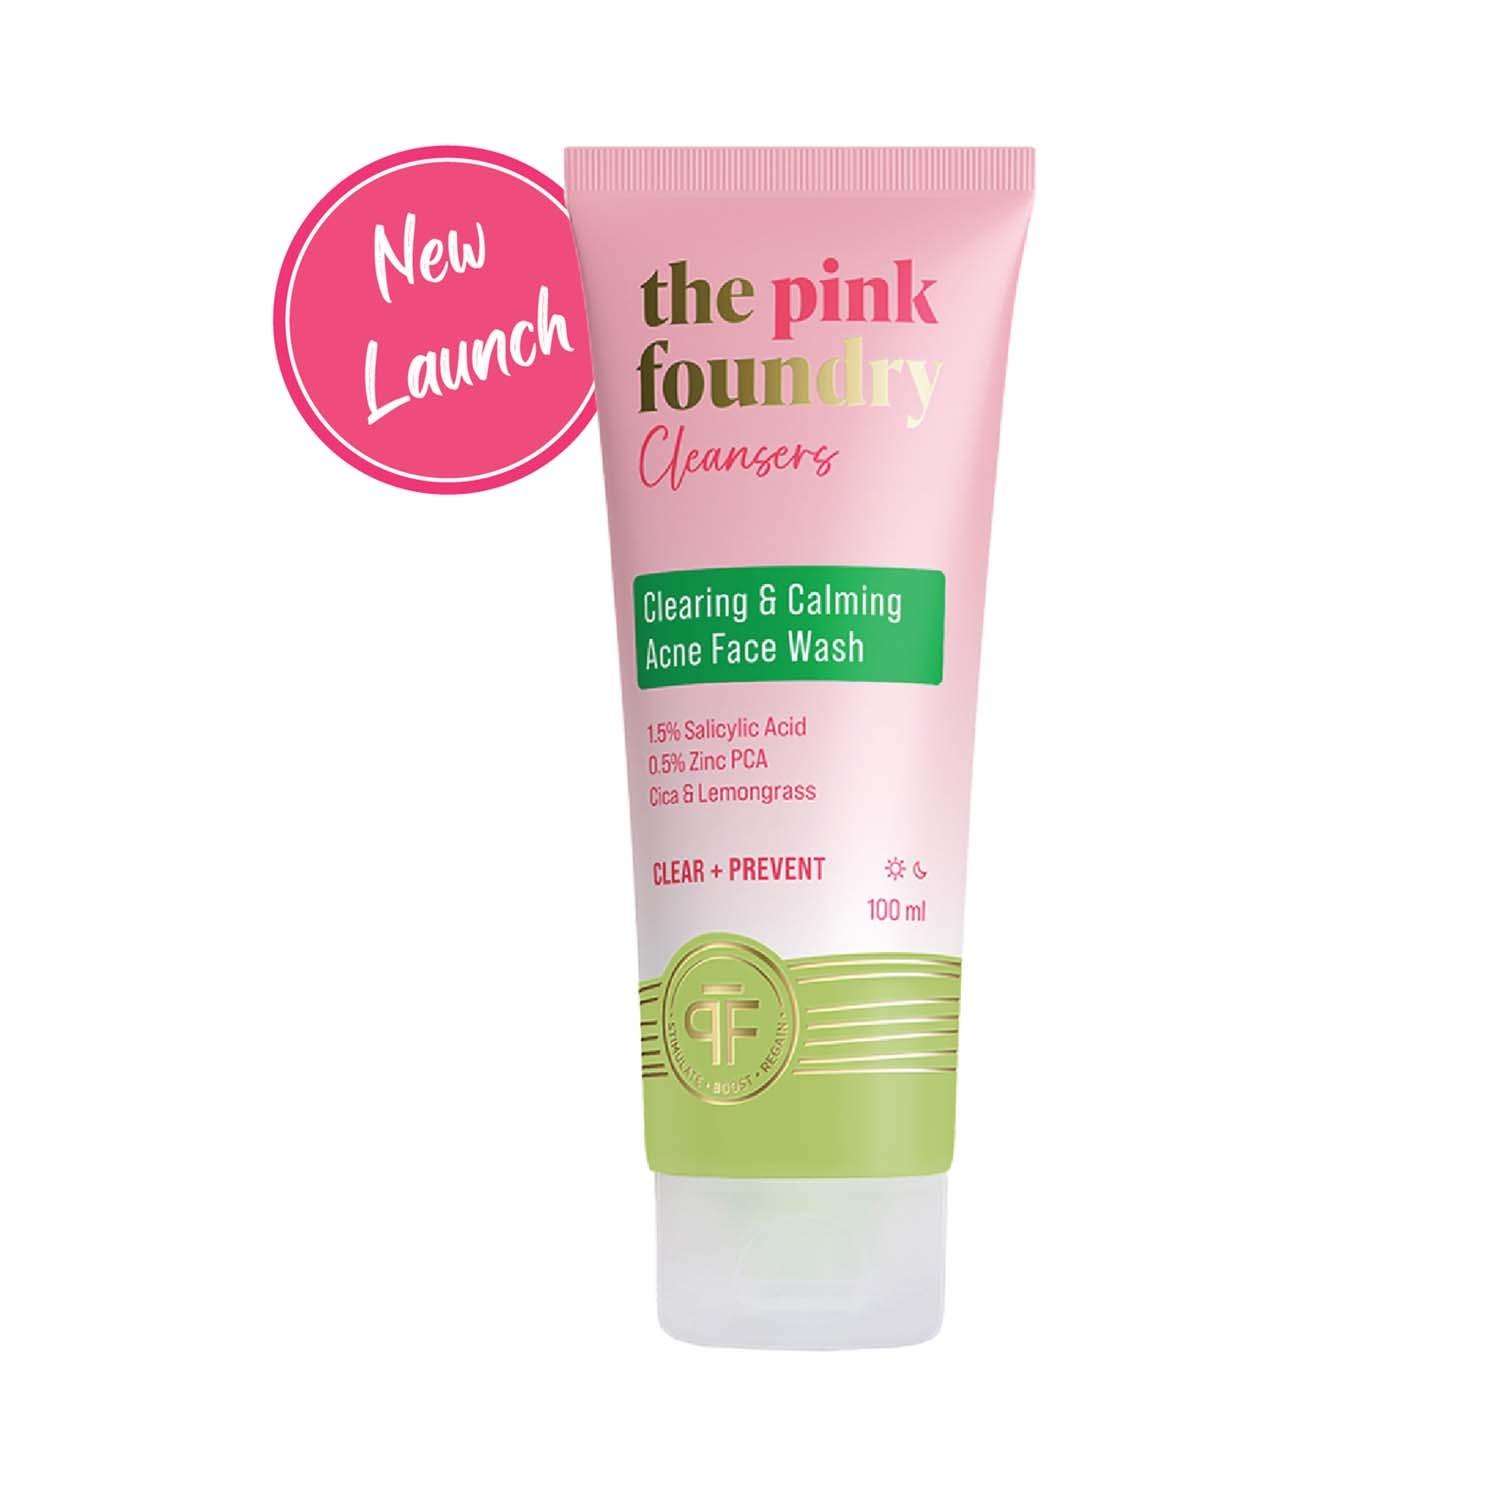 The Pink Foundry Clearing & Calming Acne Face Wash (100ml)